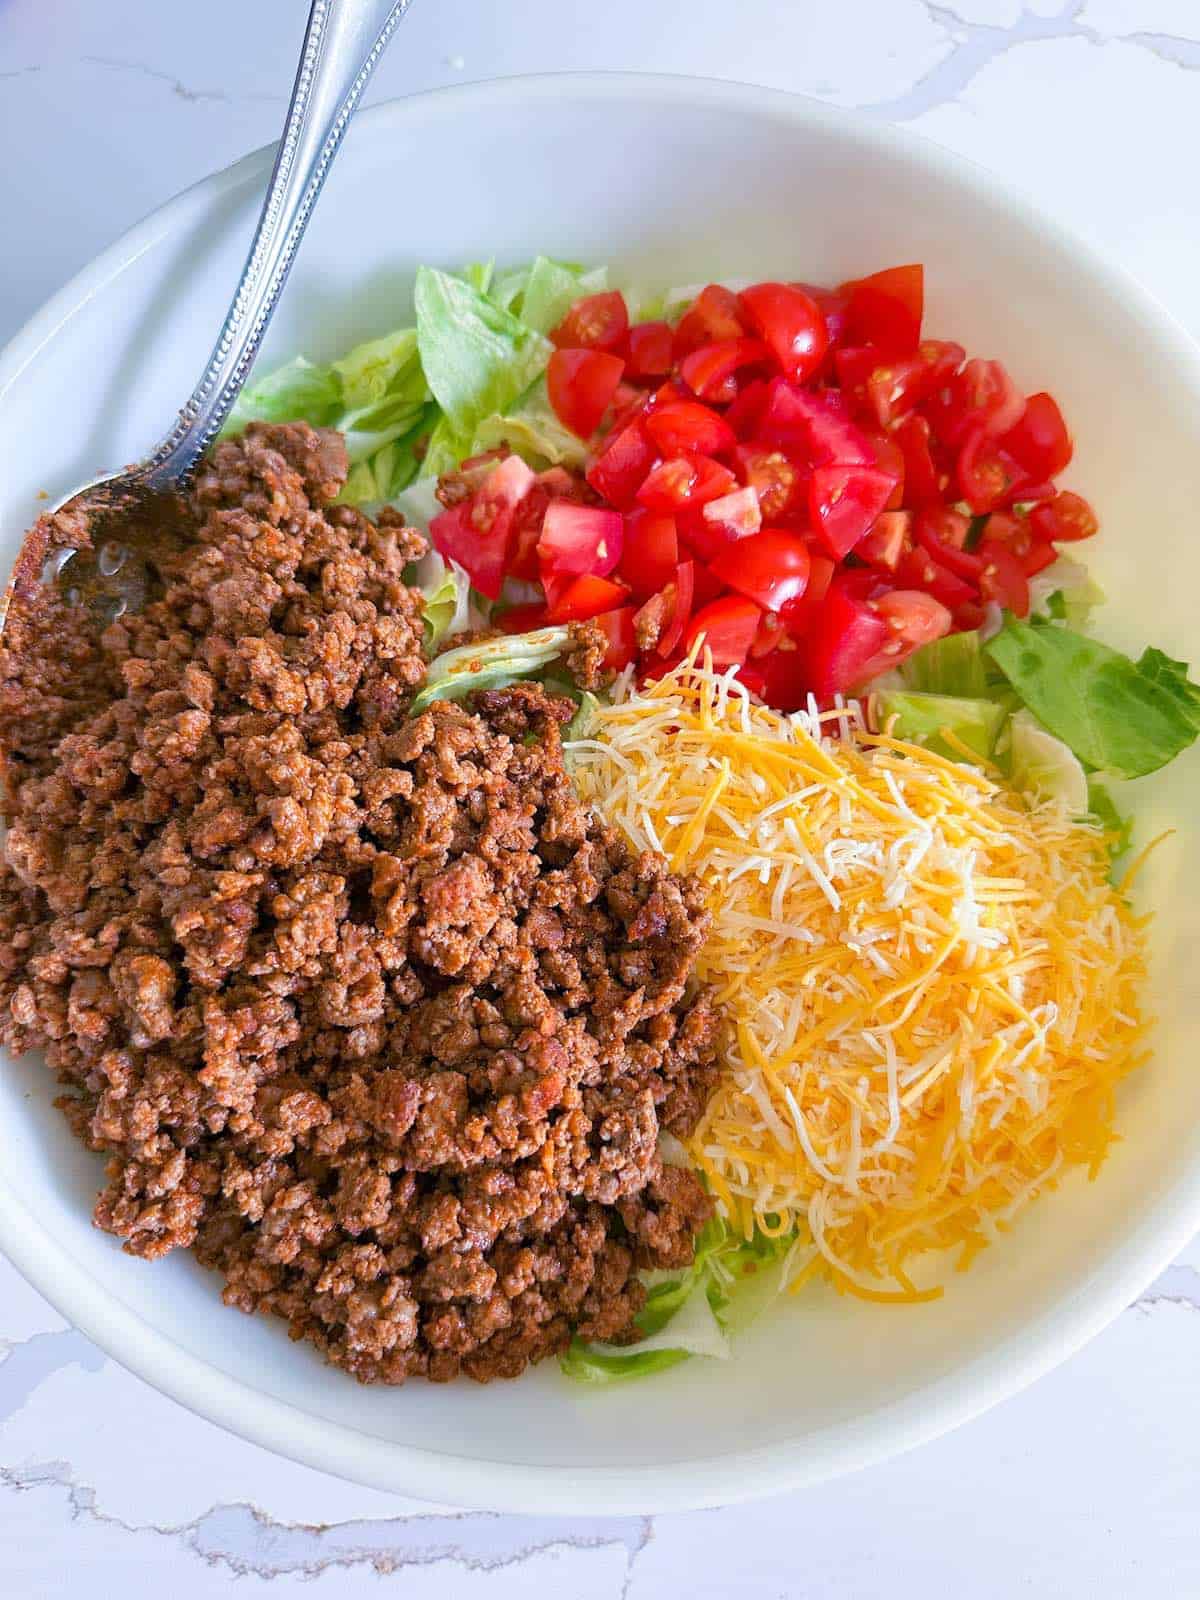 Taco meat, lettuce, cheese blend and diced tomatoes in a mixing bowl.